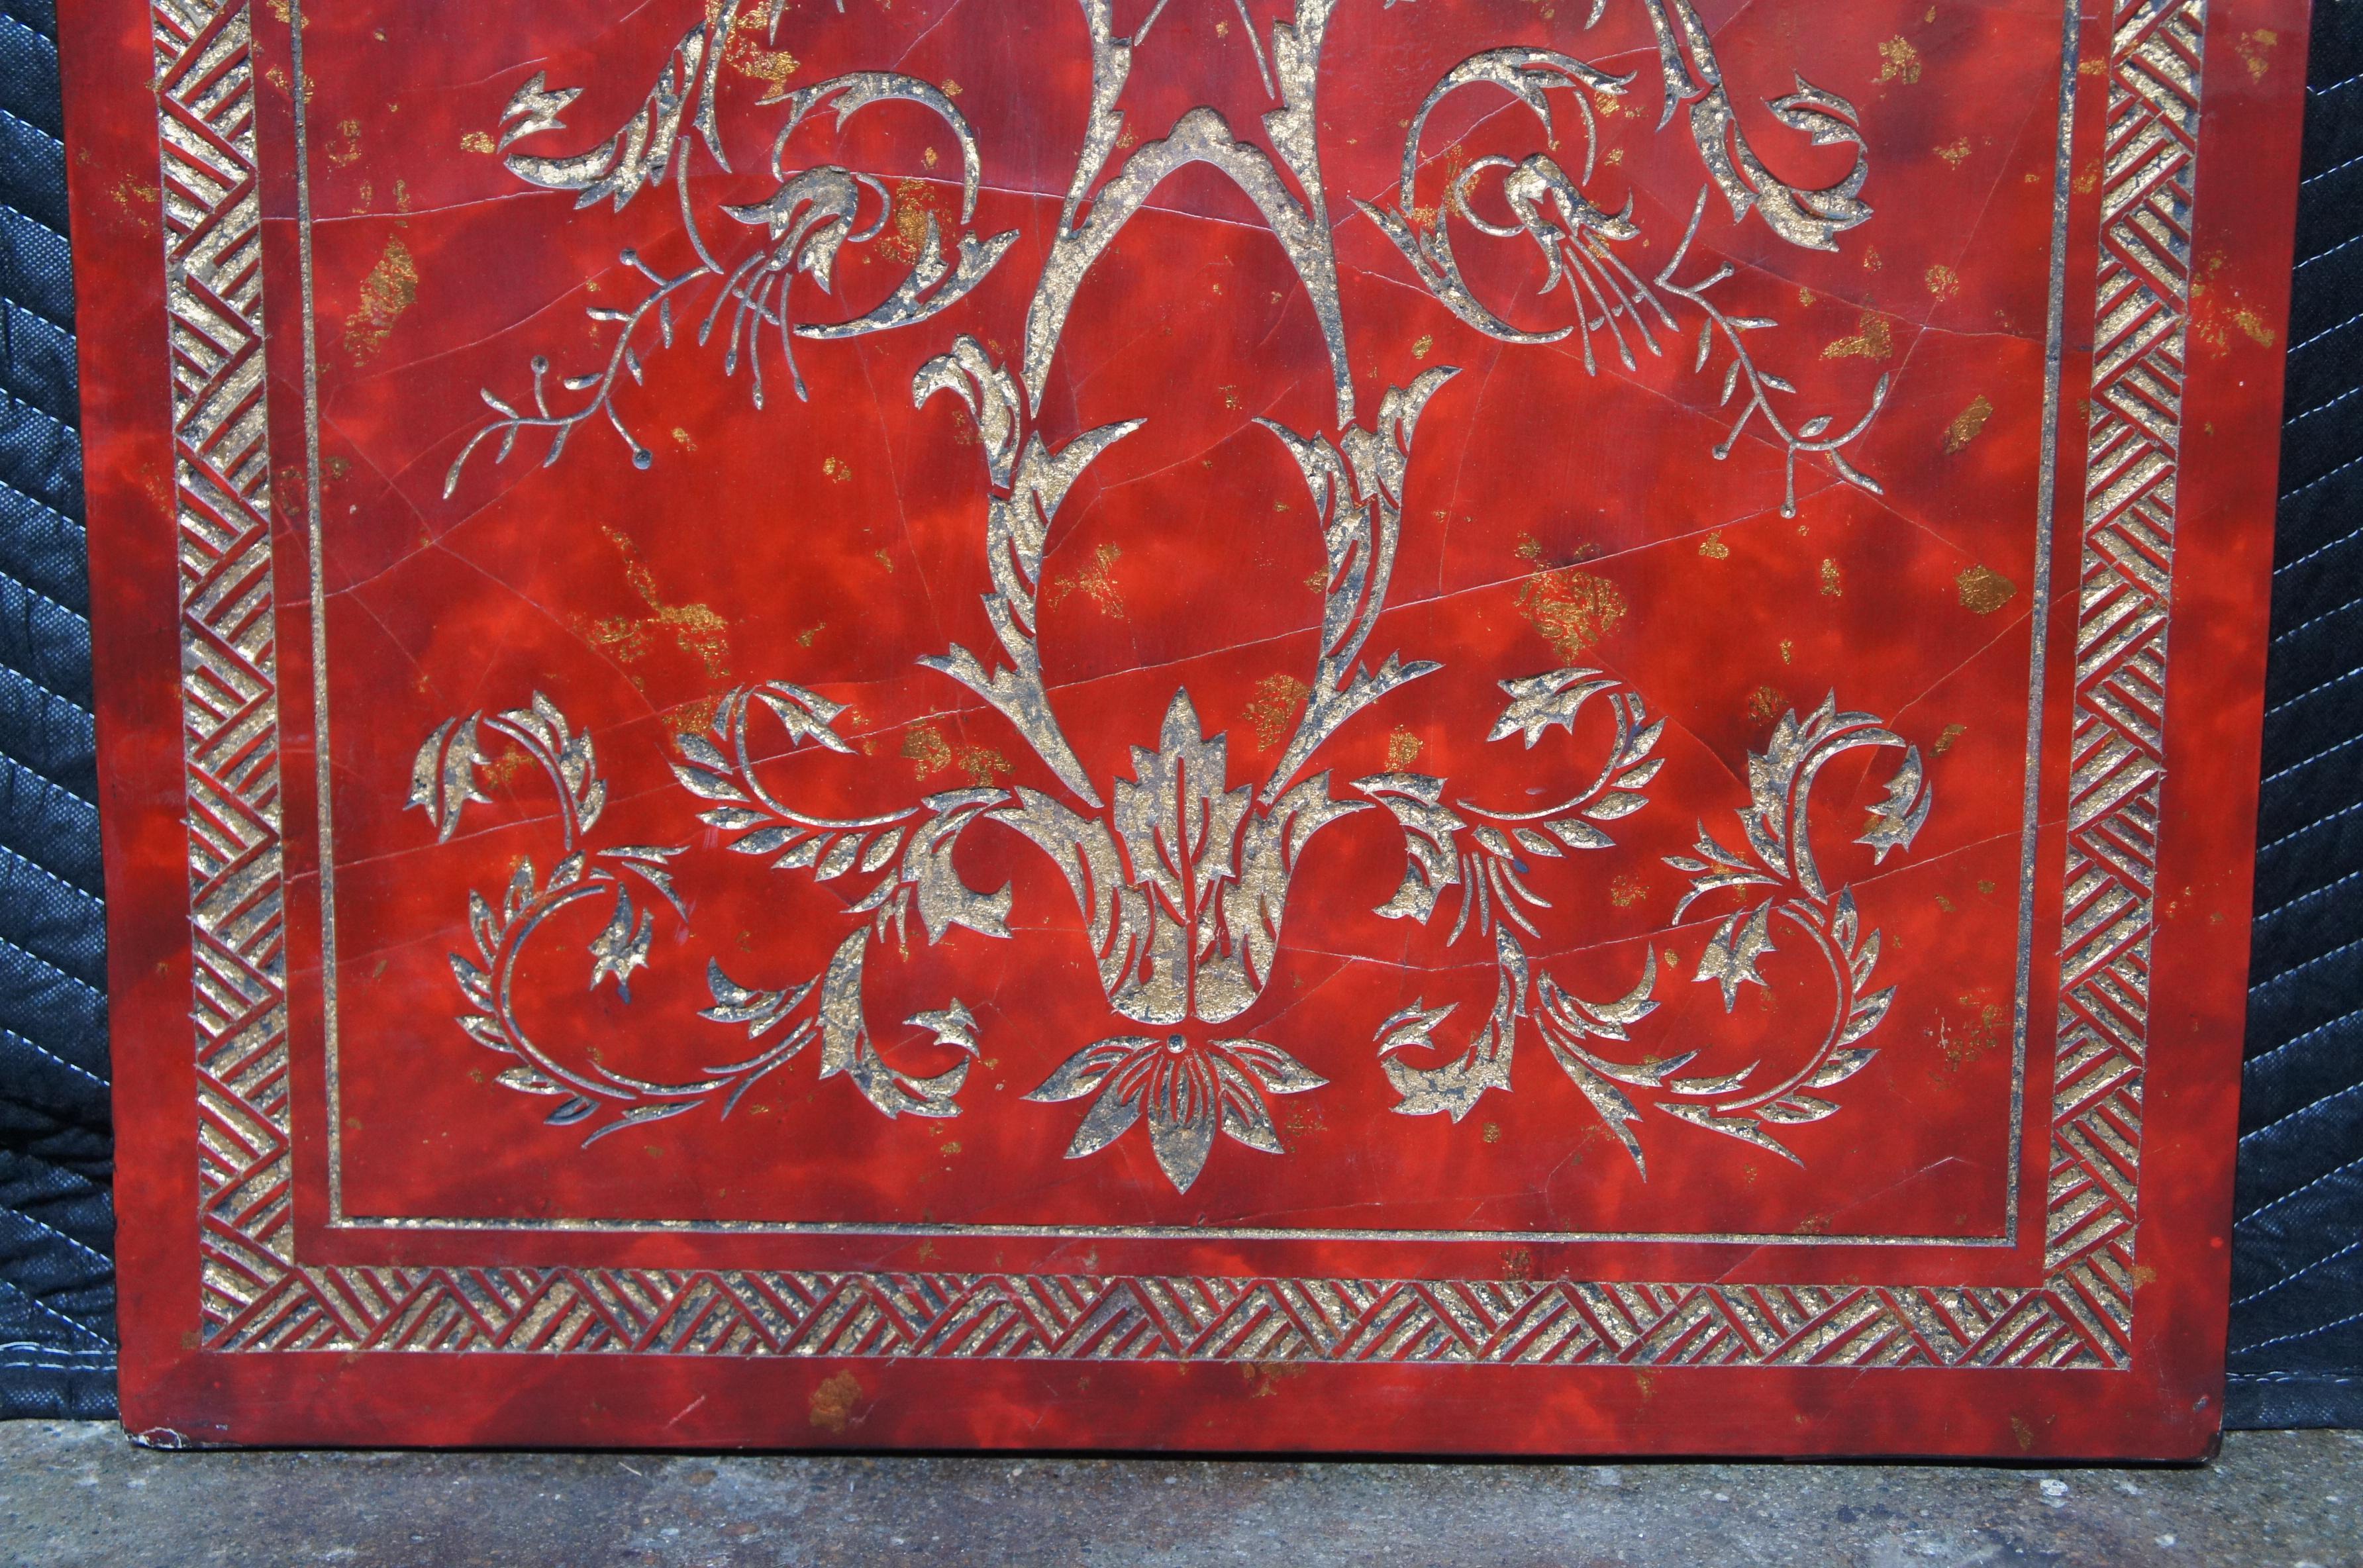 2 French Neoclassical Style Red Lacquer Wall Hanging Panels Gold Urns & Figures For Sale 1